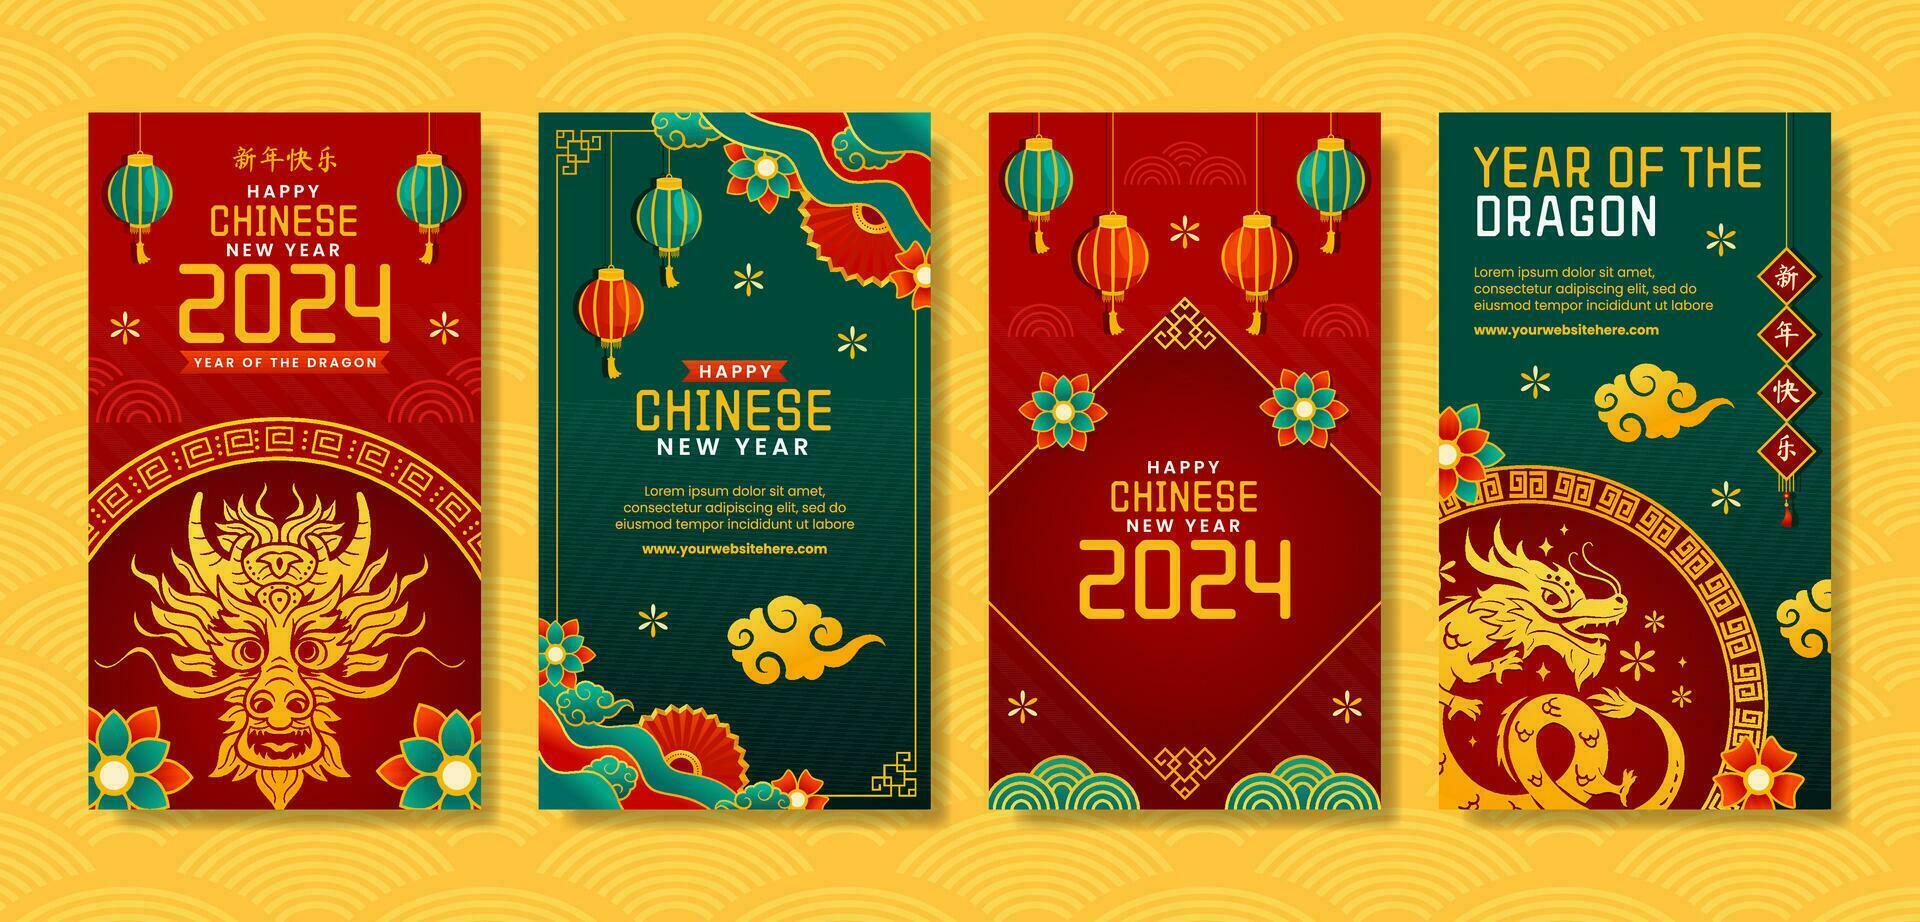 Chinese New Year 2024 Social Media Stories Illustration Flat Cartoon Hand Drawn Templates Background vector